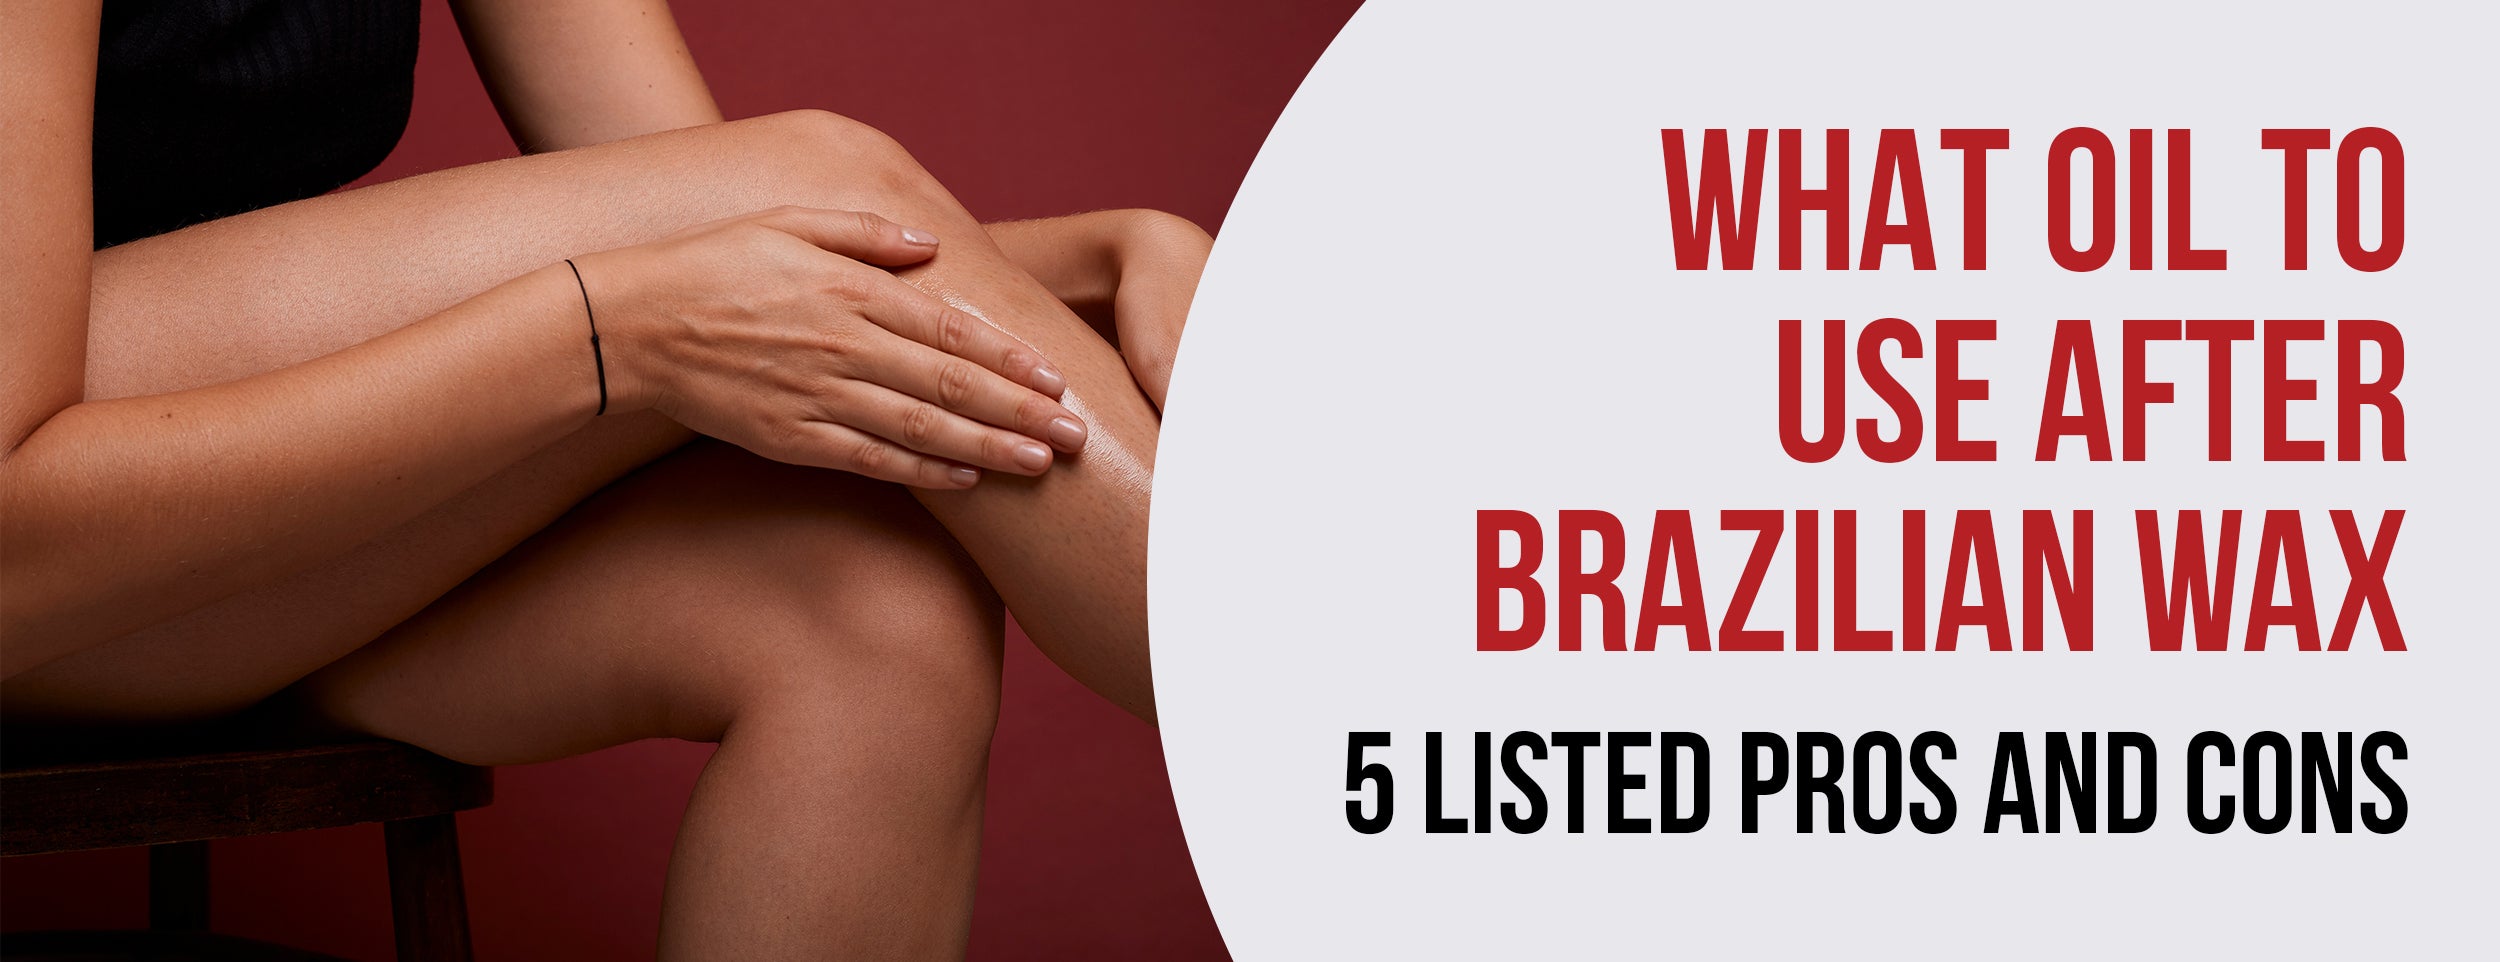 5 Best Oils After Brazilian Wax: Pros and Cons